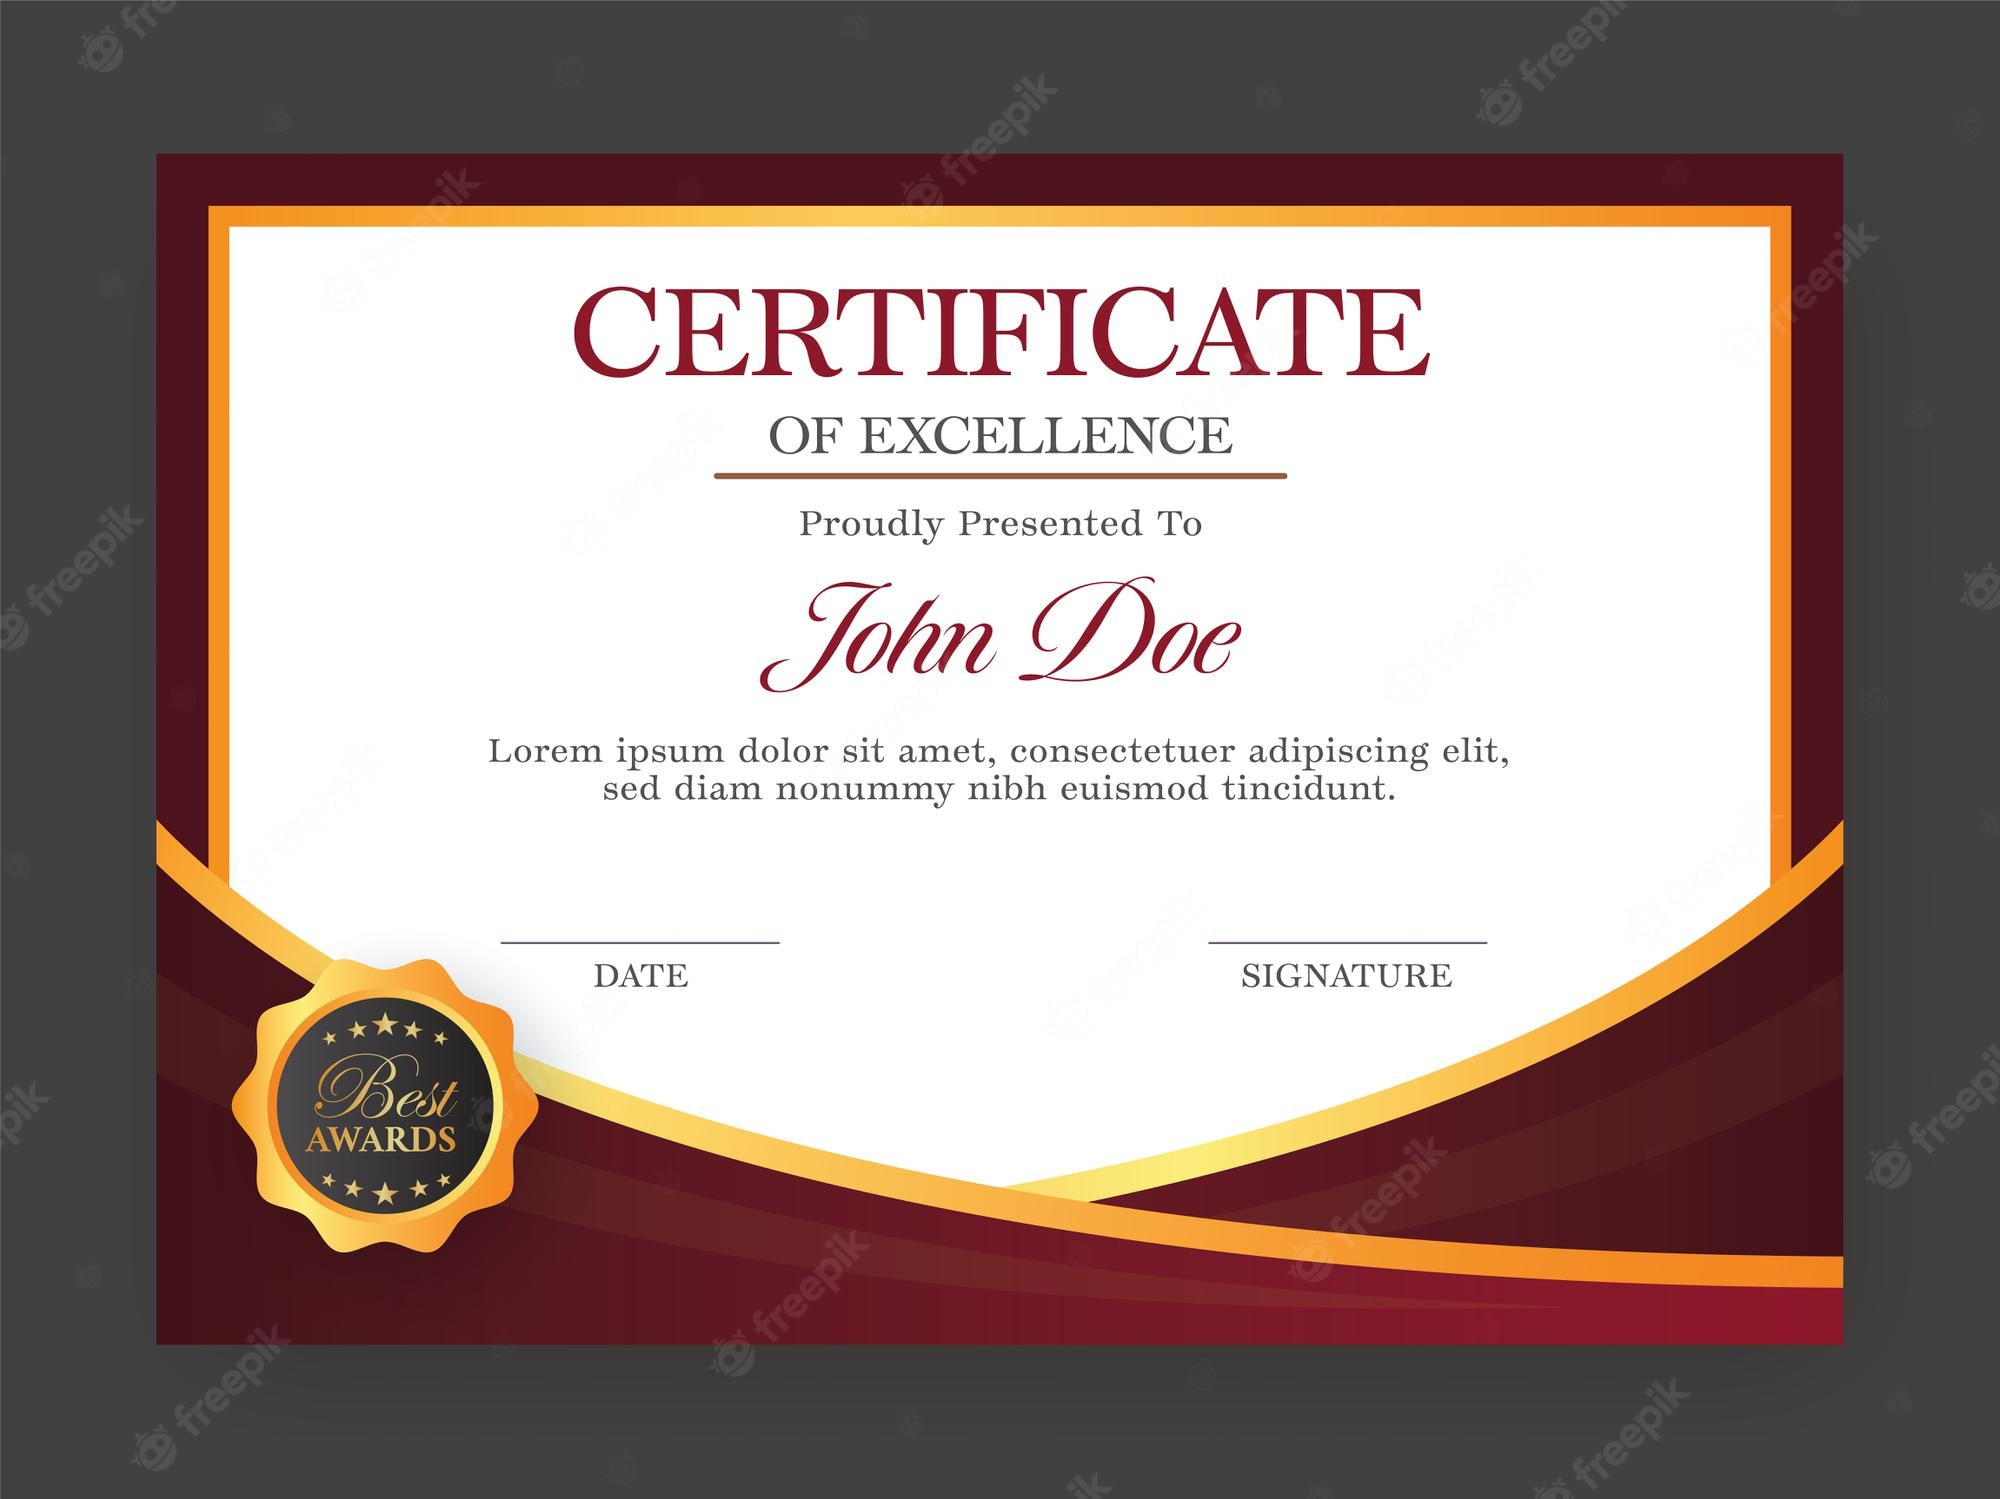 Premium Vector  Certificate of excellence template design in red  Intended For Award Of Excellence Certificate Template